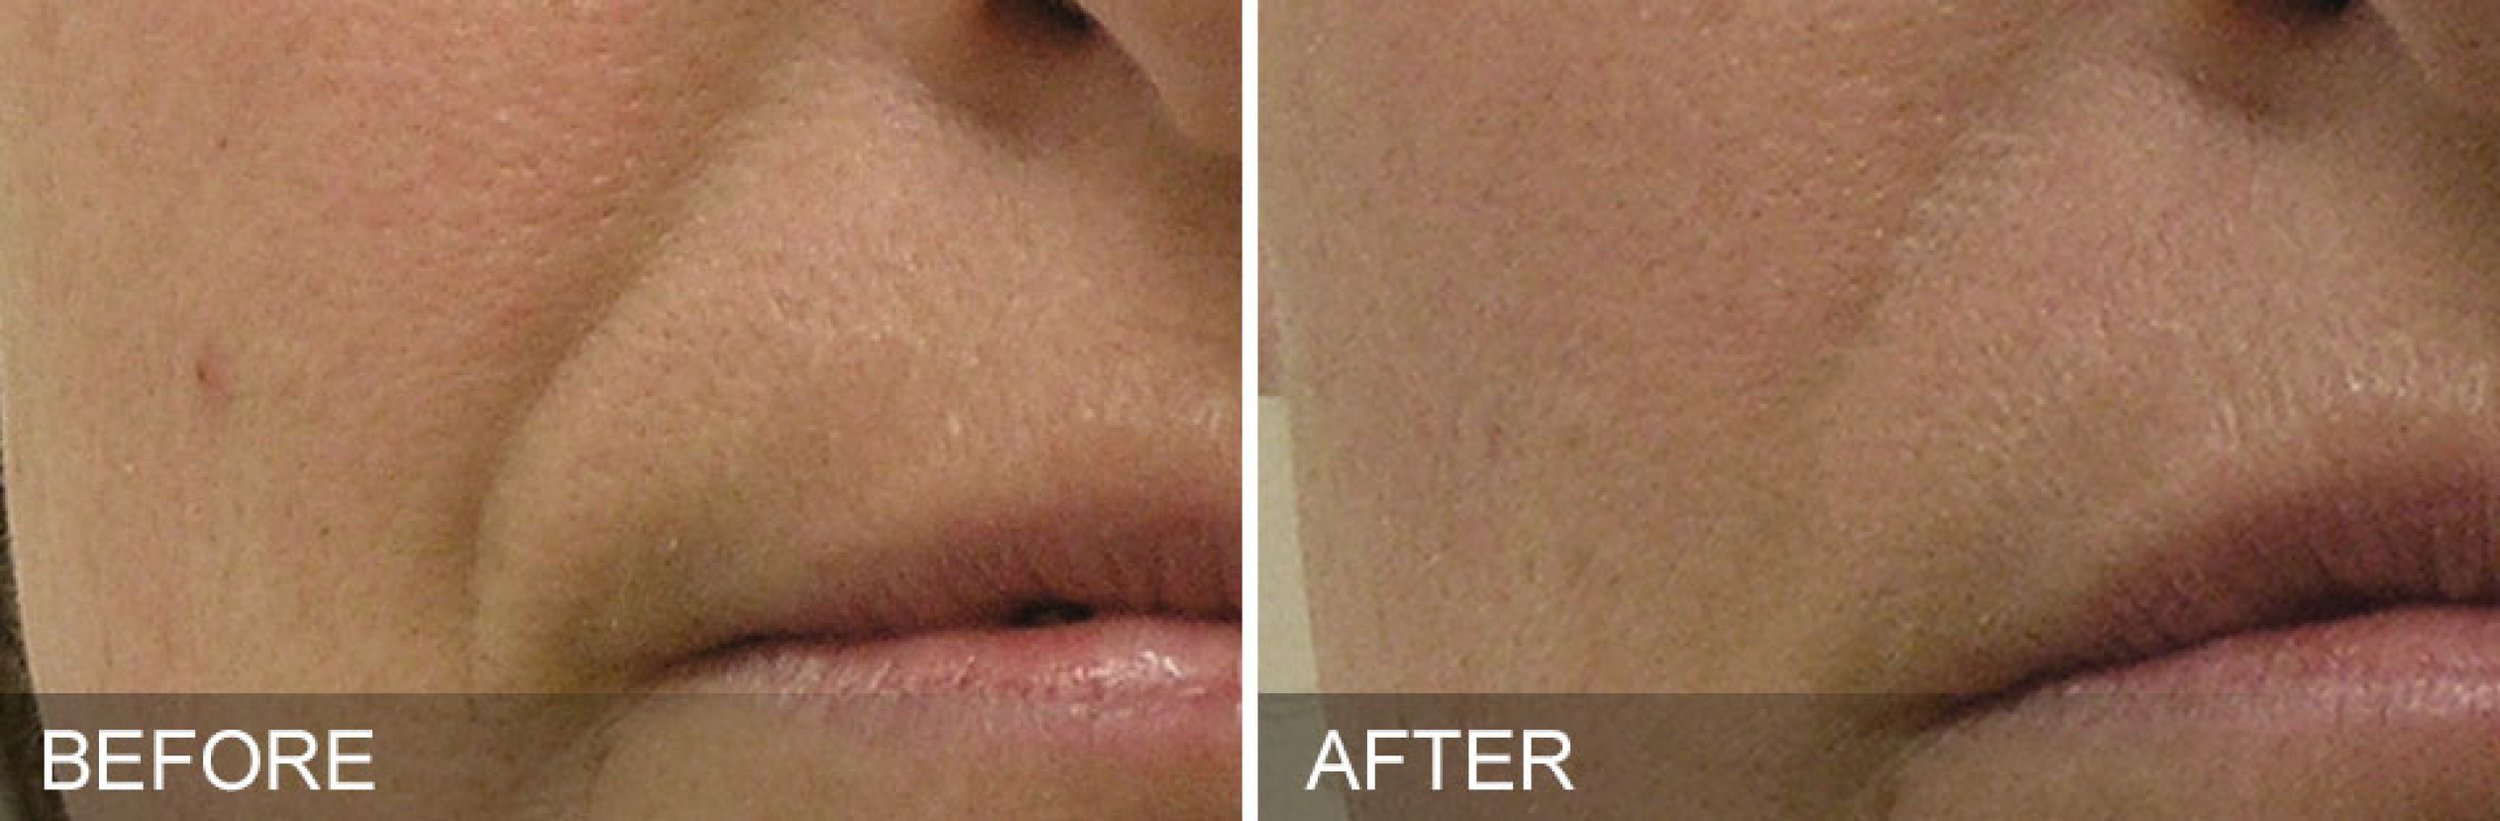 before and after hydrafacial.jpg